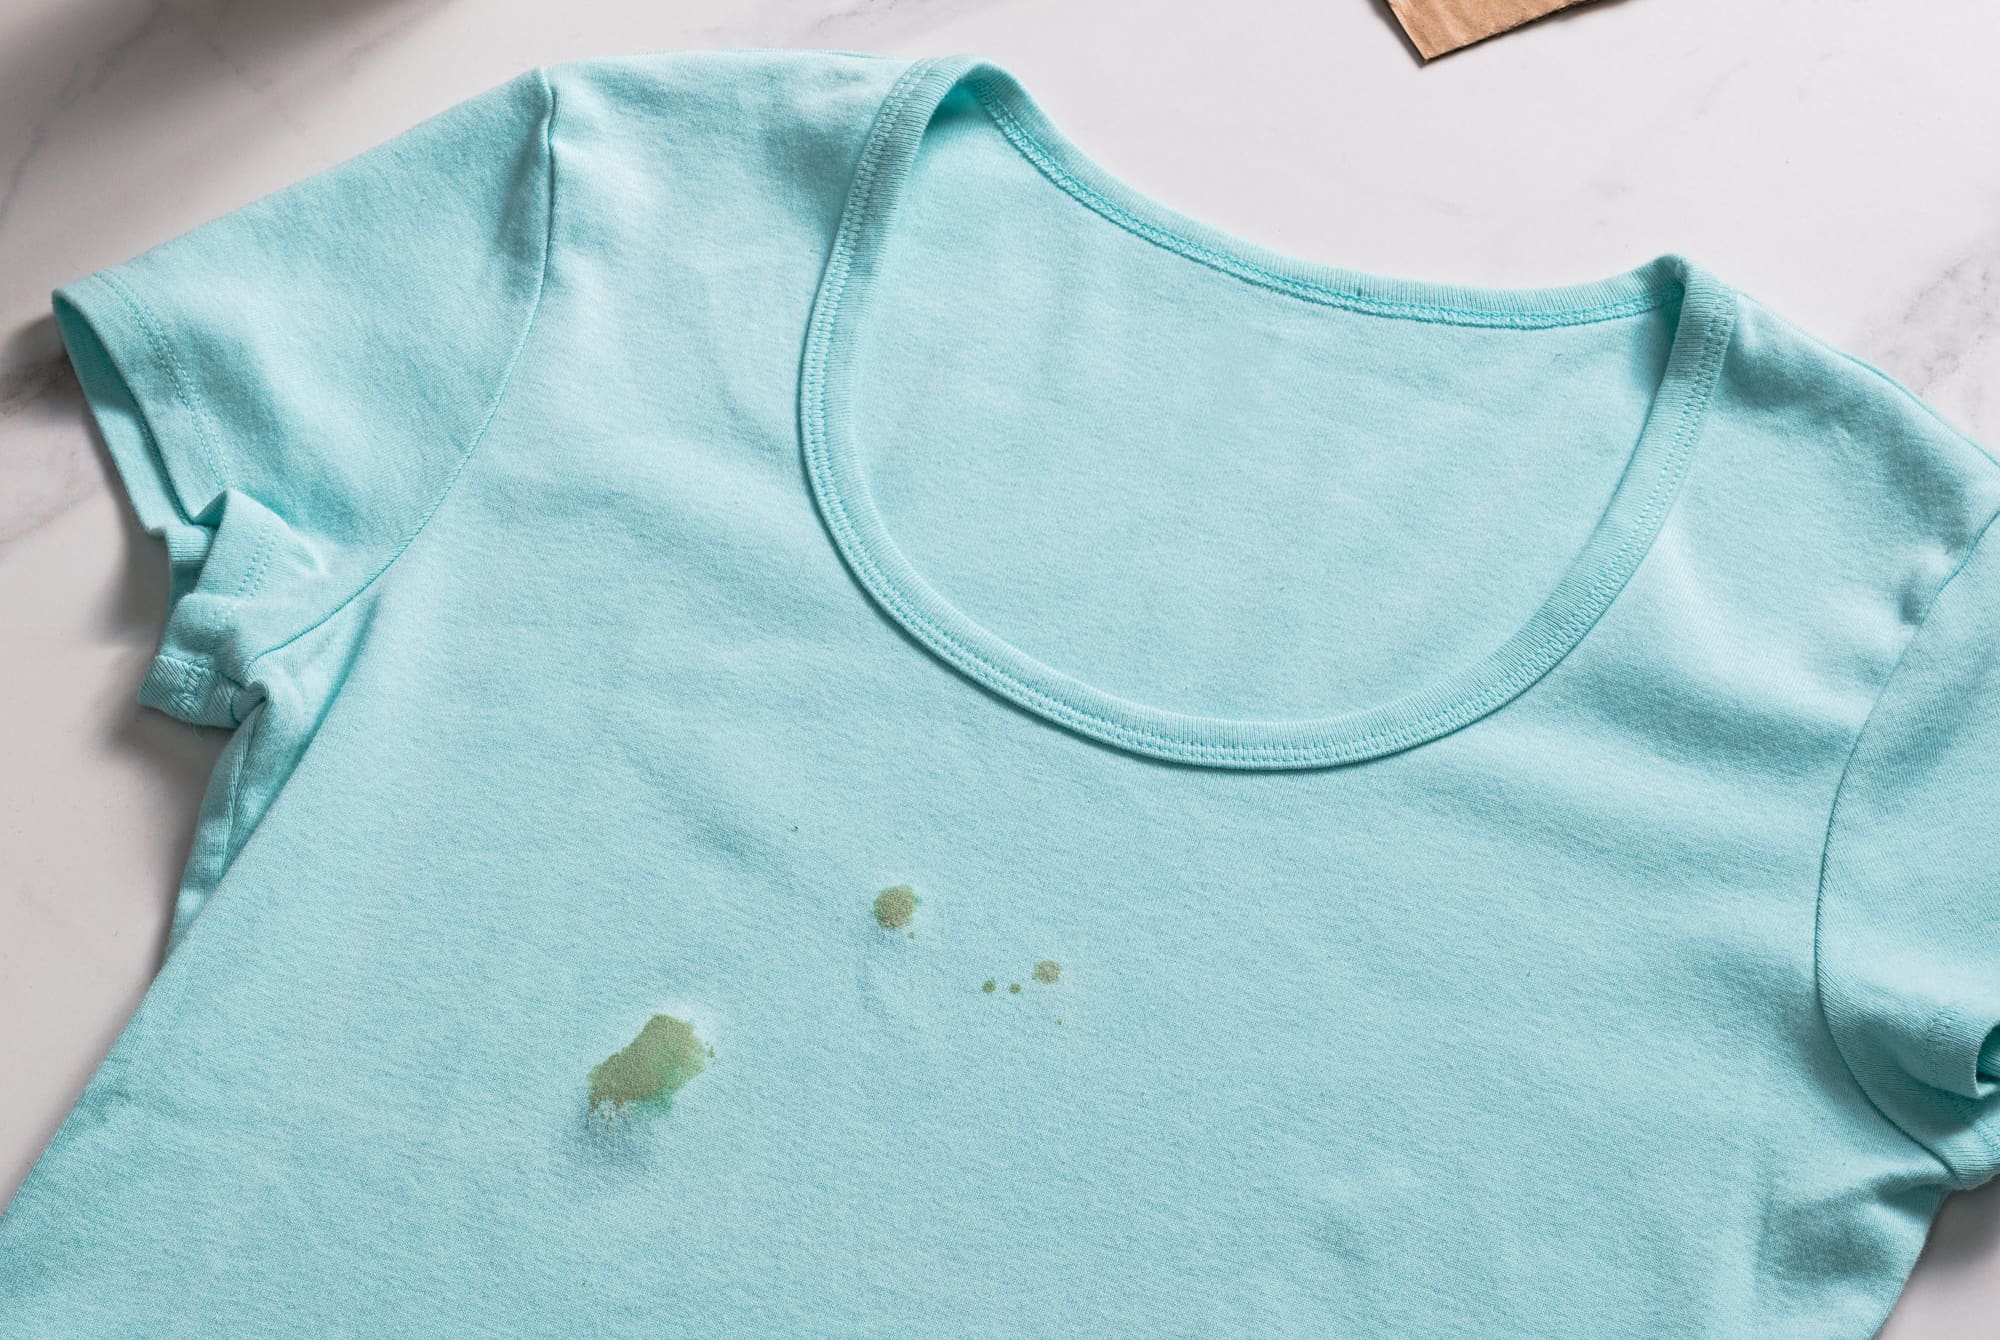 The 9 Biggest Clothing Stain Removal Mistakes